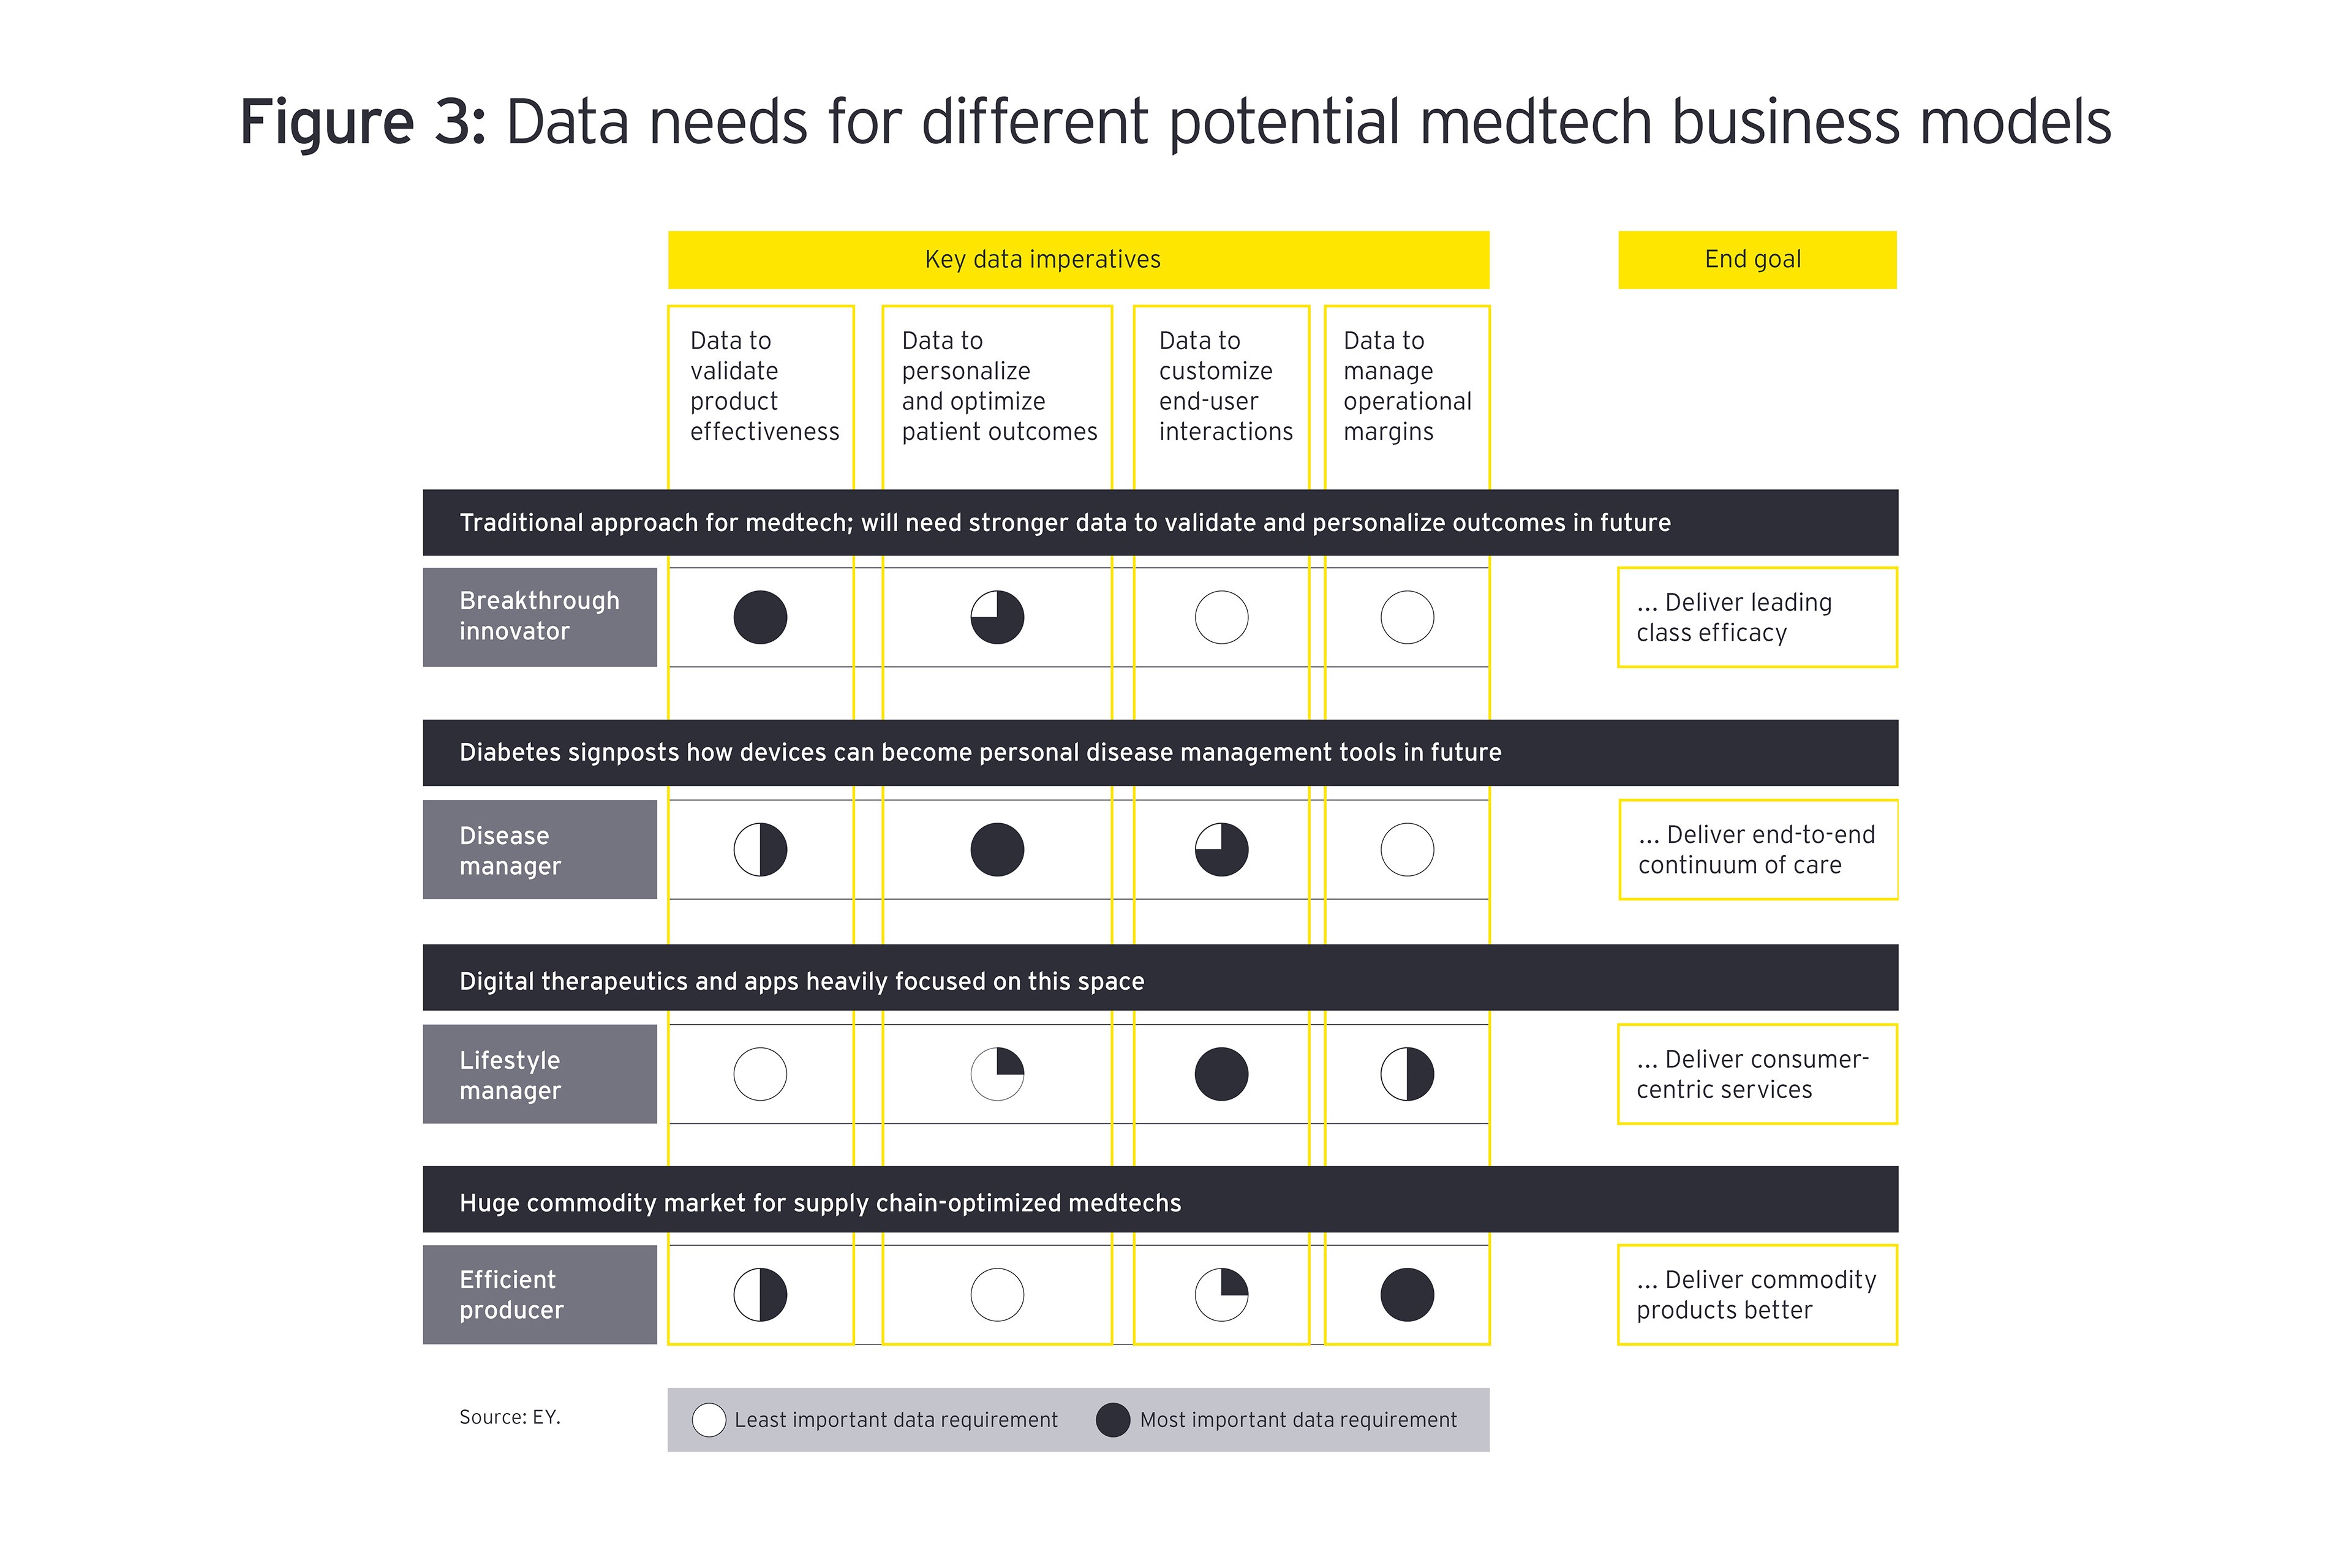 Graphic: Business models for the future, and the data demands they will face